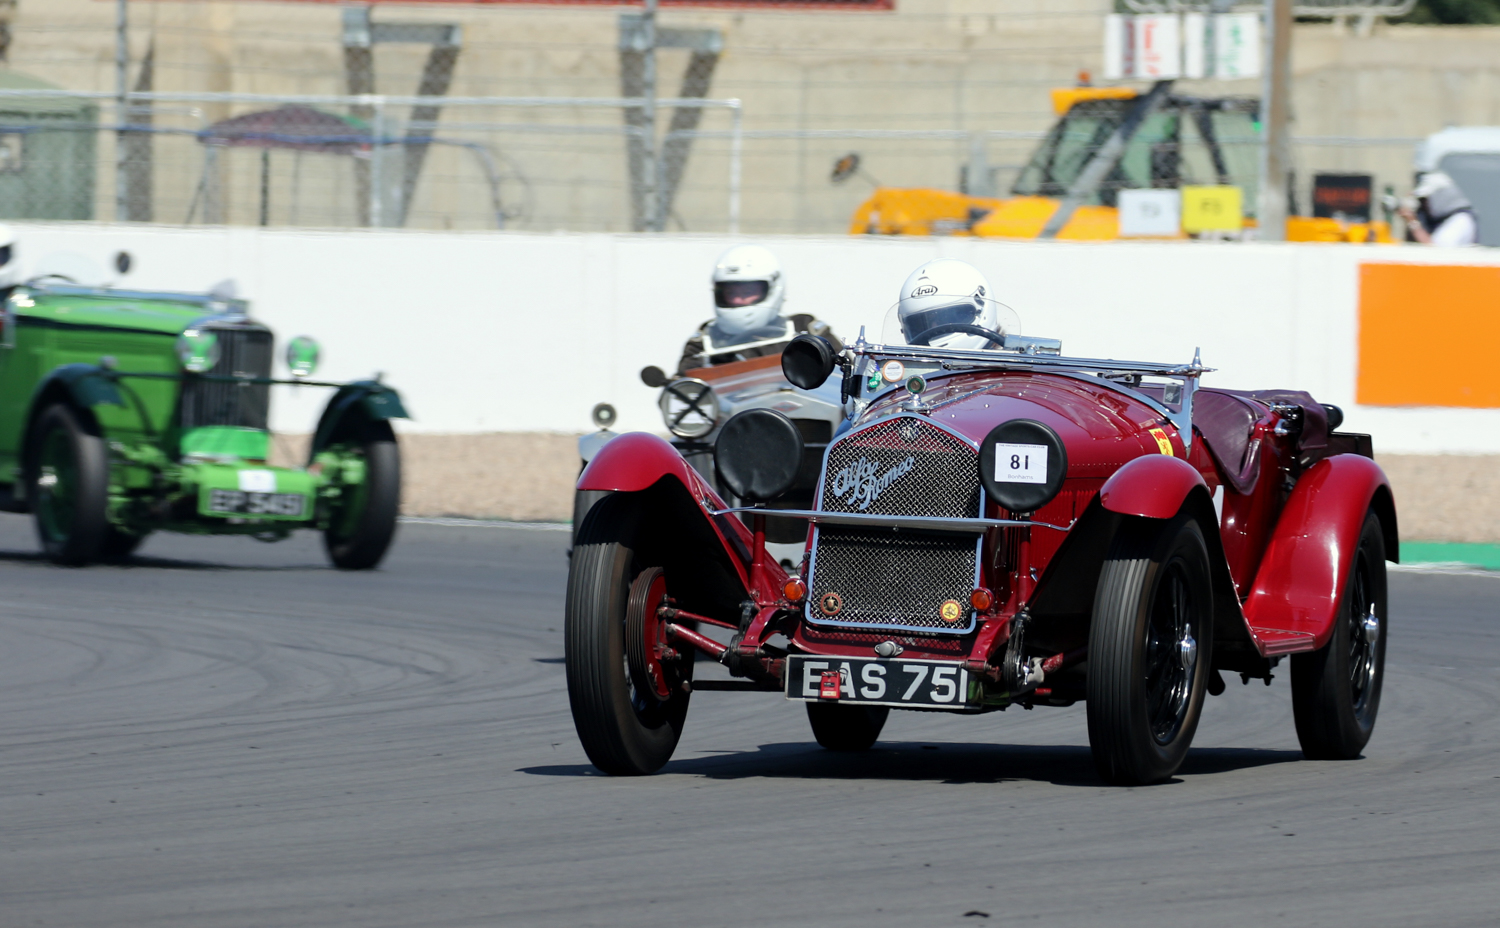 ALEX PILKINGTON HOLDS OF NASH AND TALBOT IN HER ALFA ROMEO 8C 1750. Picasa